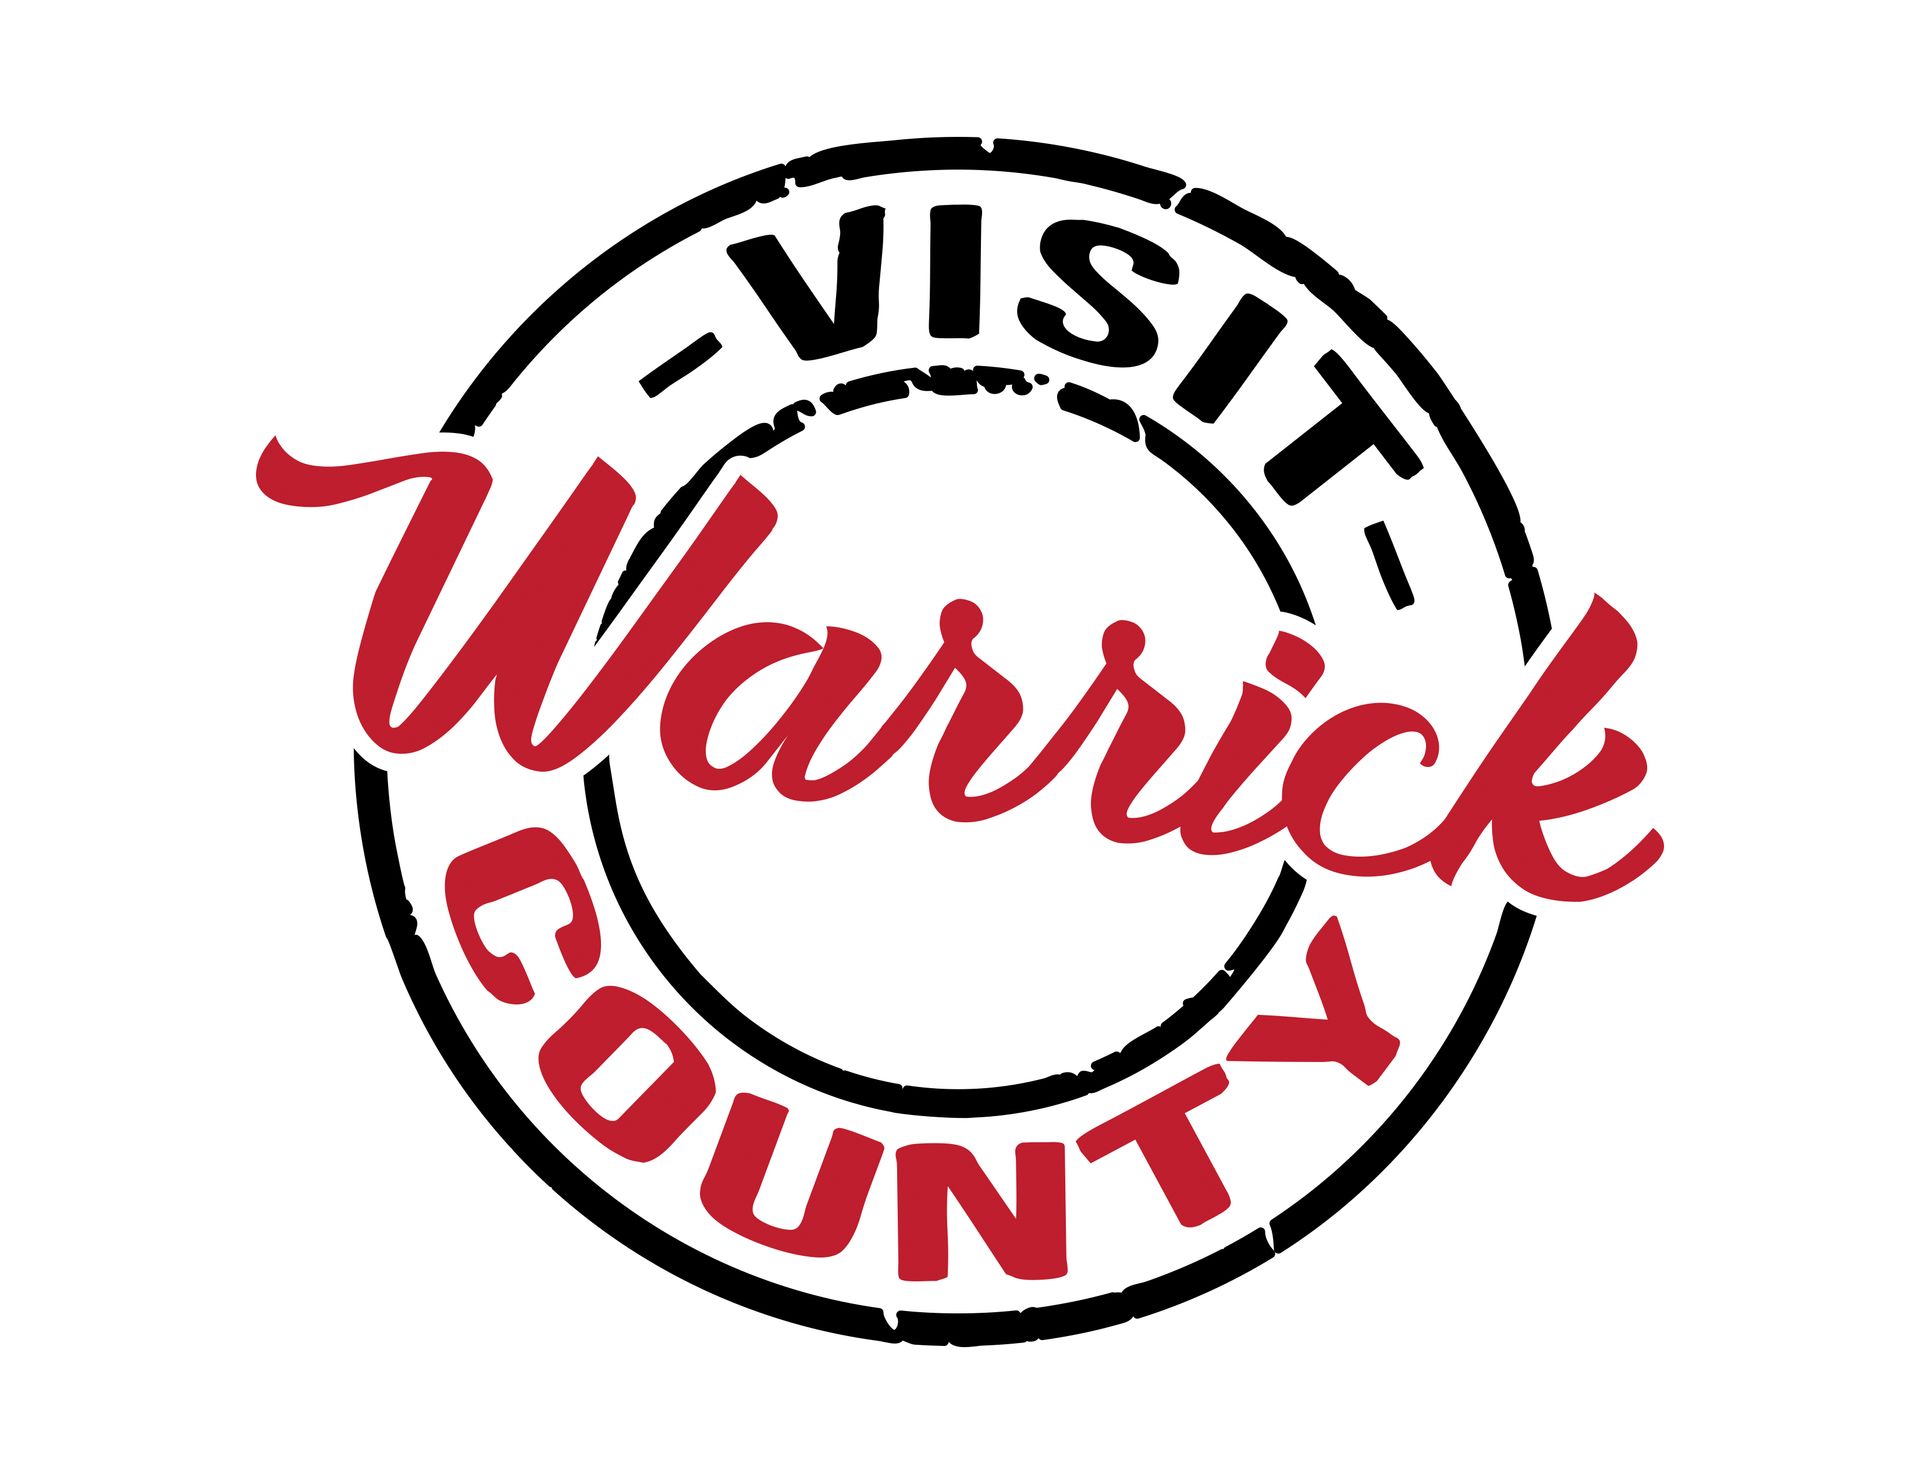 the logo for warwick county is red and black